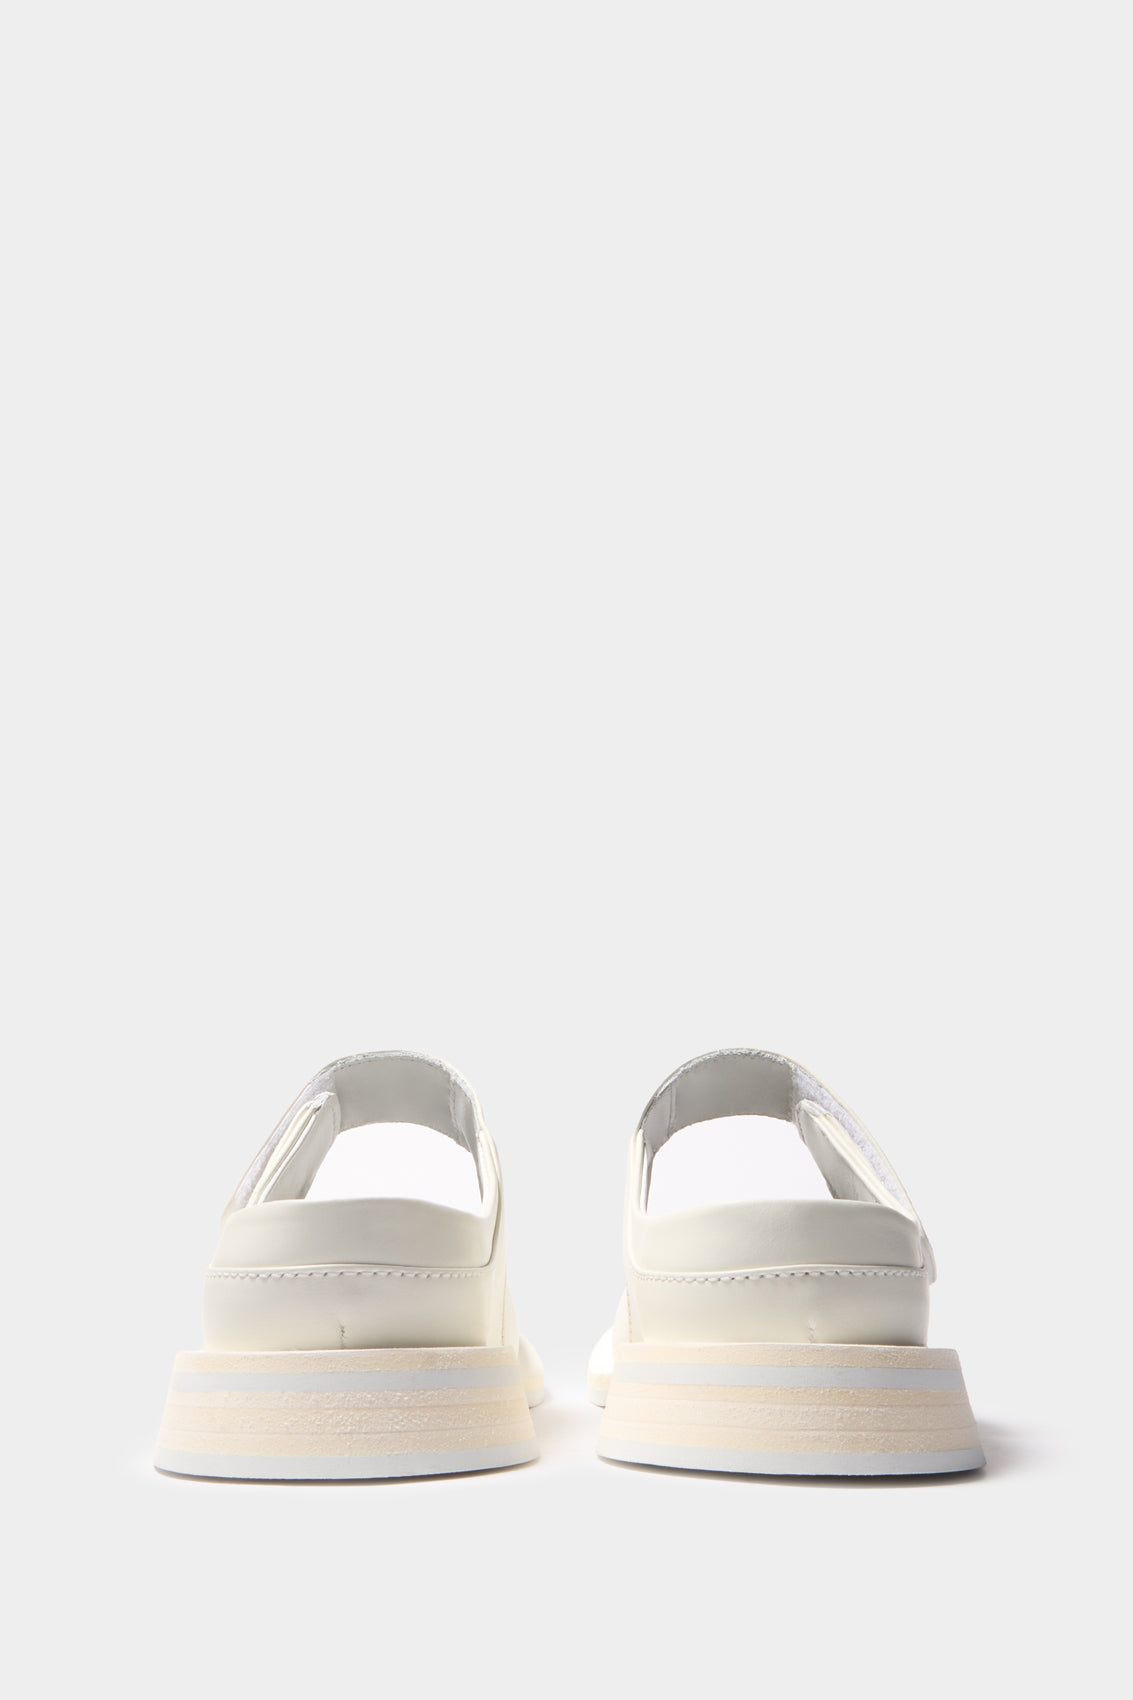 FORM MARG SABOT SHOES / off white